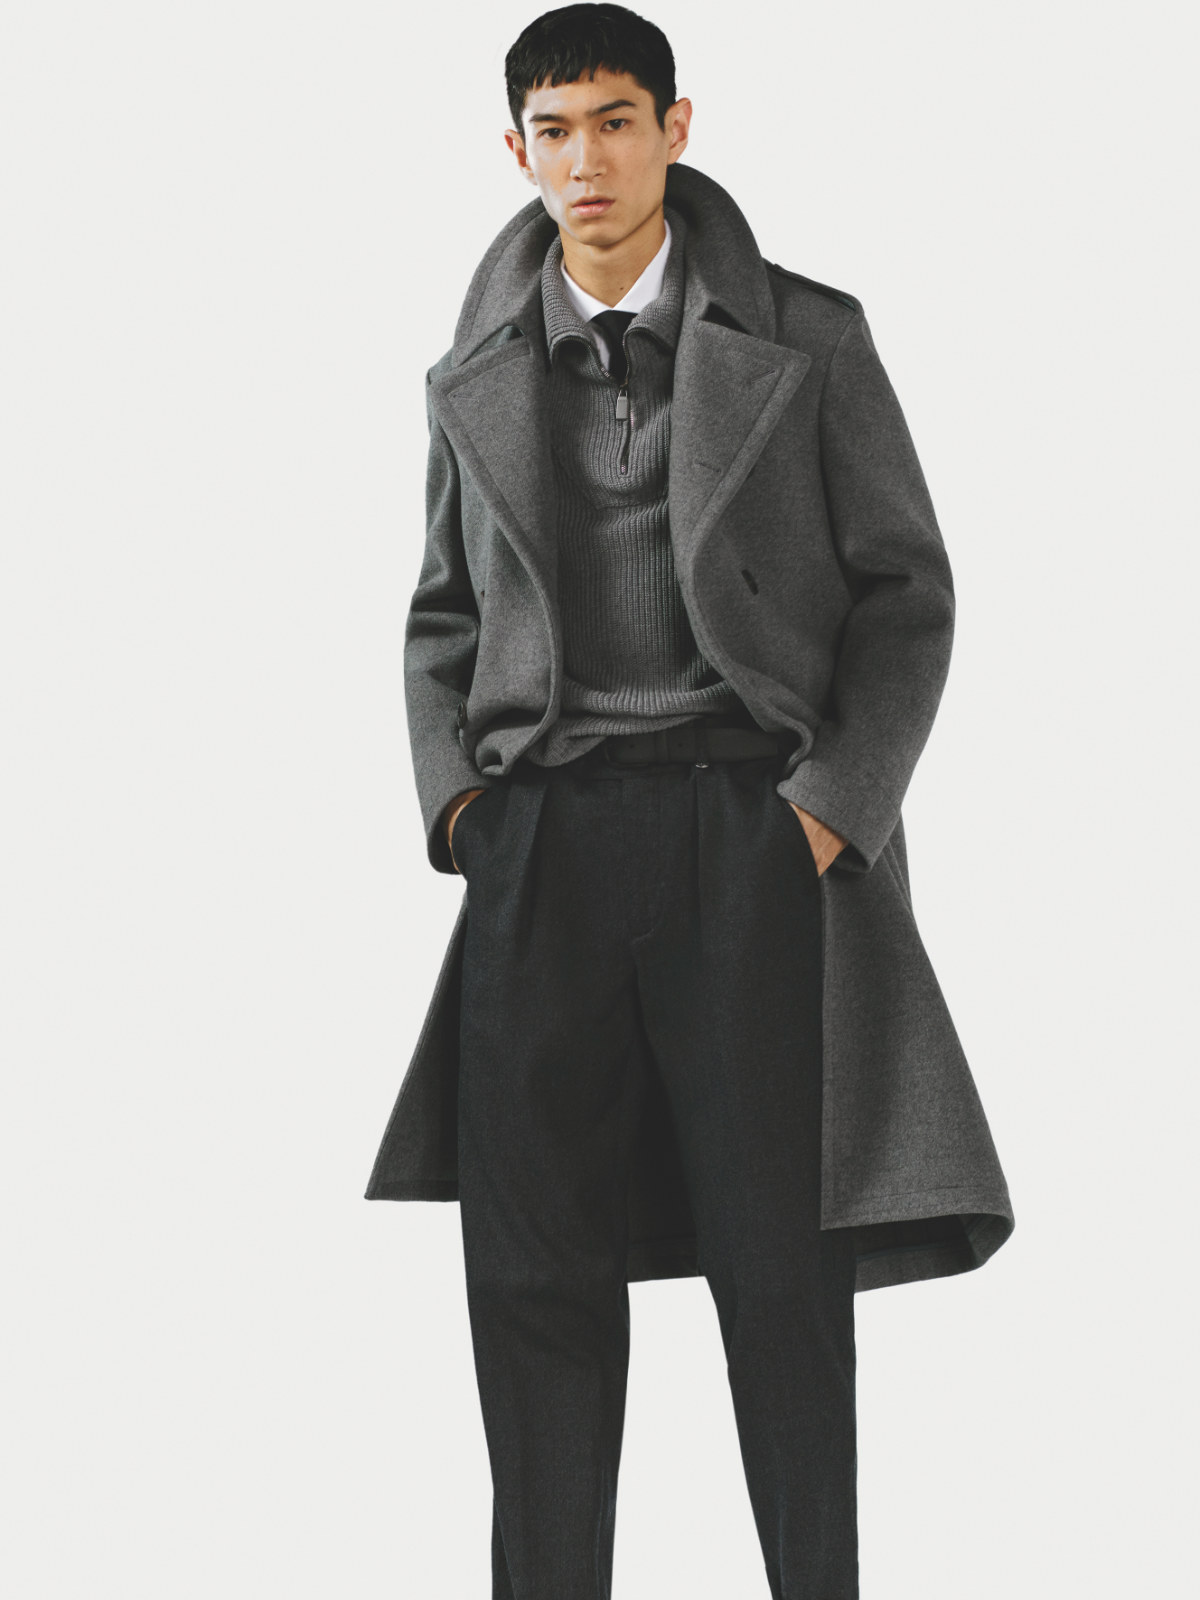 Canali Presents Its New Autumn-Winter 2022 Collection